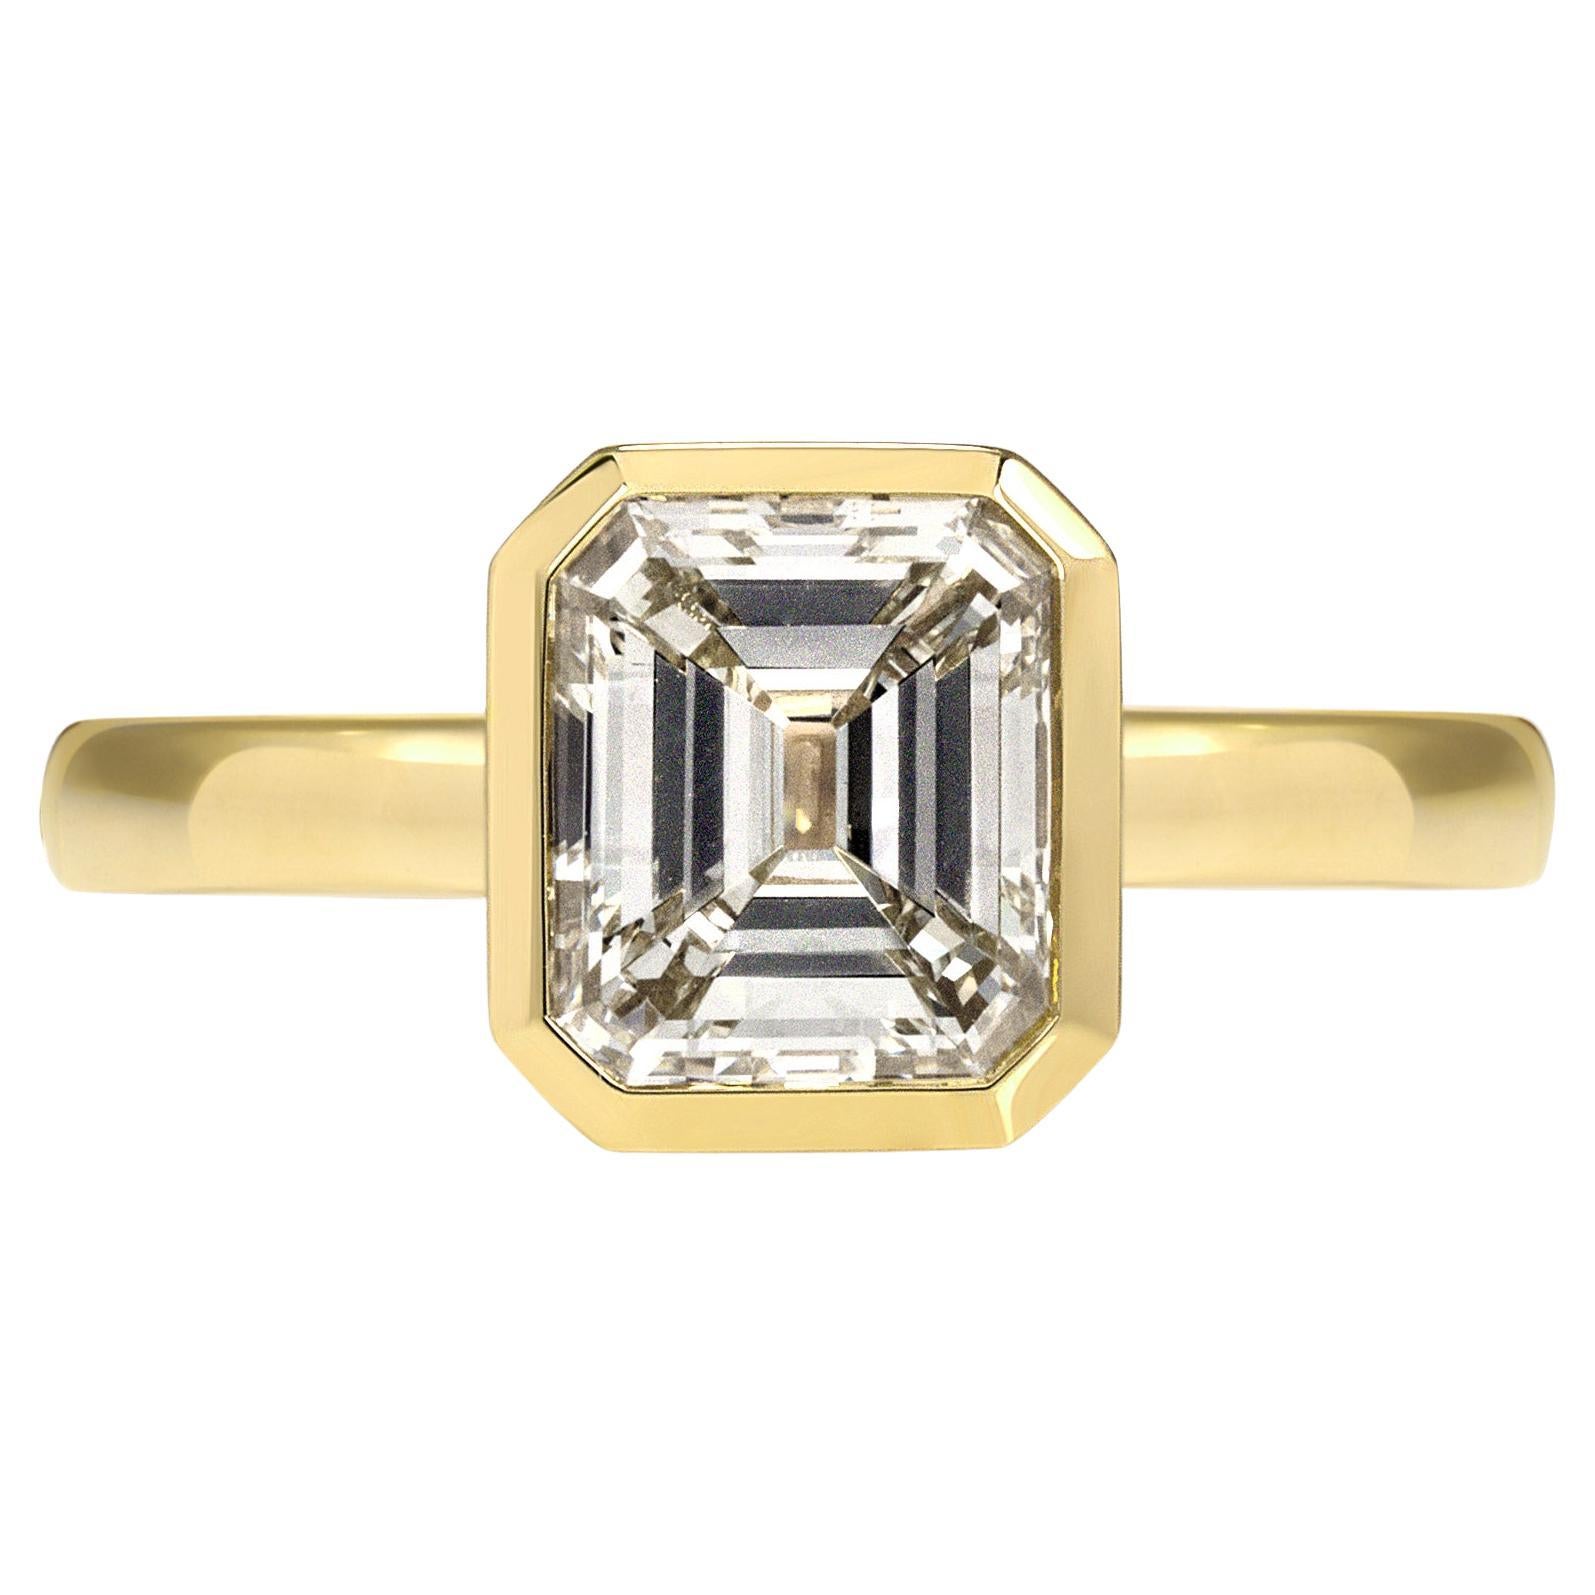 Handcrafted Wyler Emerald Cut Diamond Engagement Ring by Single Stone